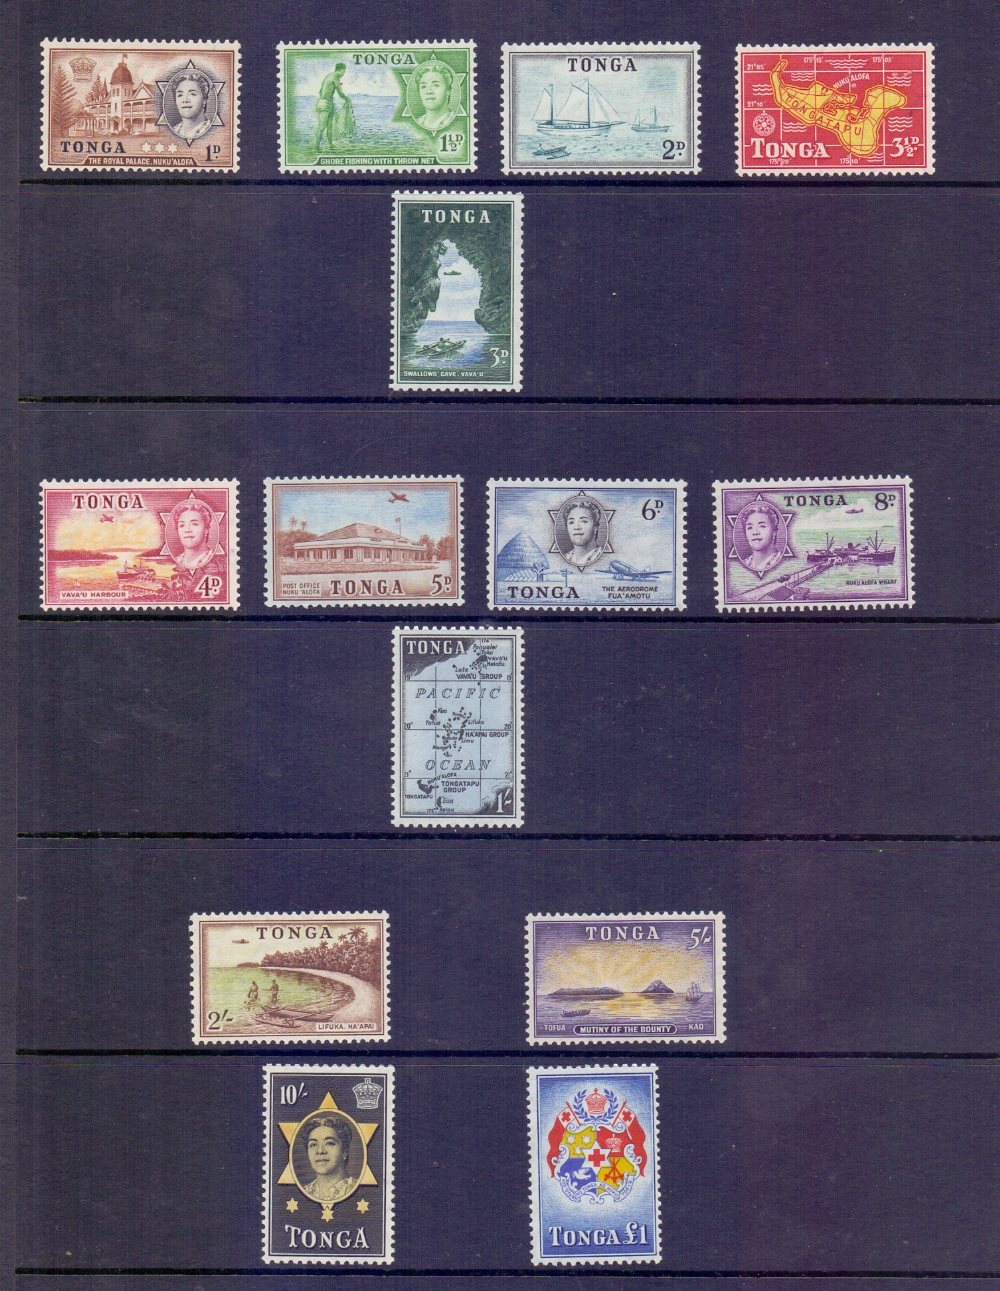 STAMPS : Small amount of unmounted mint stamps, Tonga, St Helena, South Georgia 1963 set to £1, - Image 2 of 2